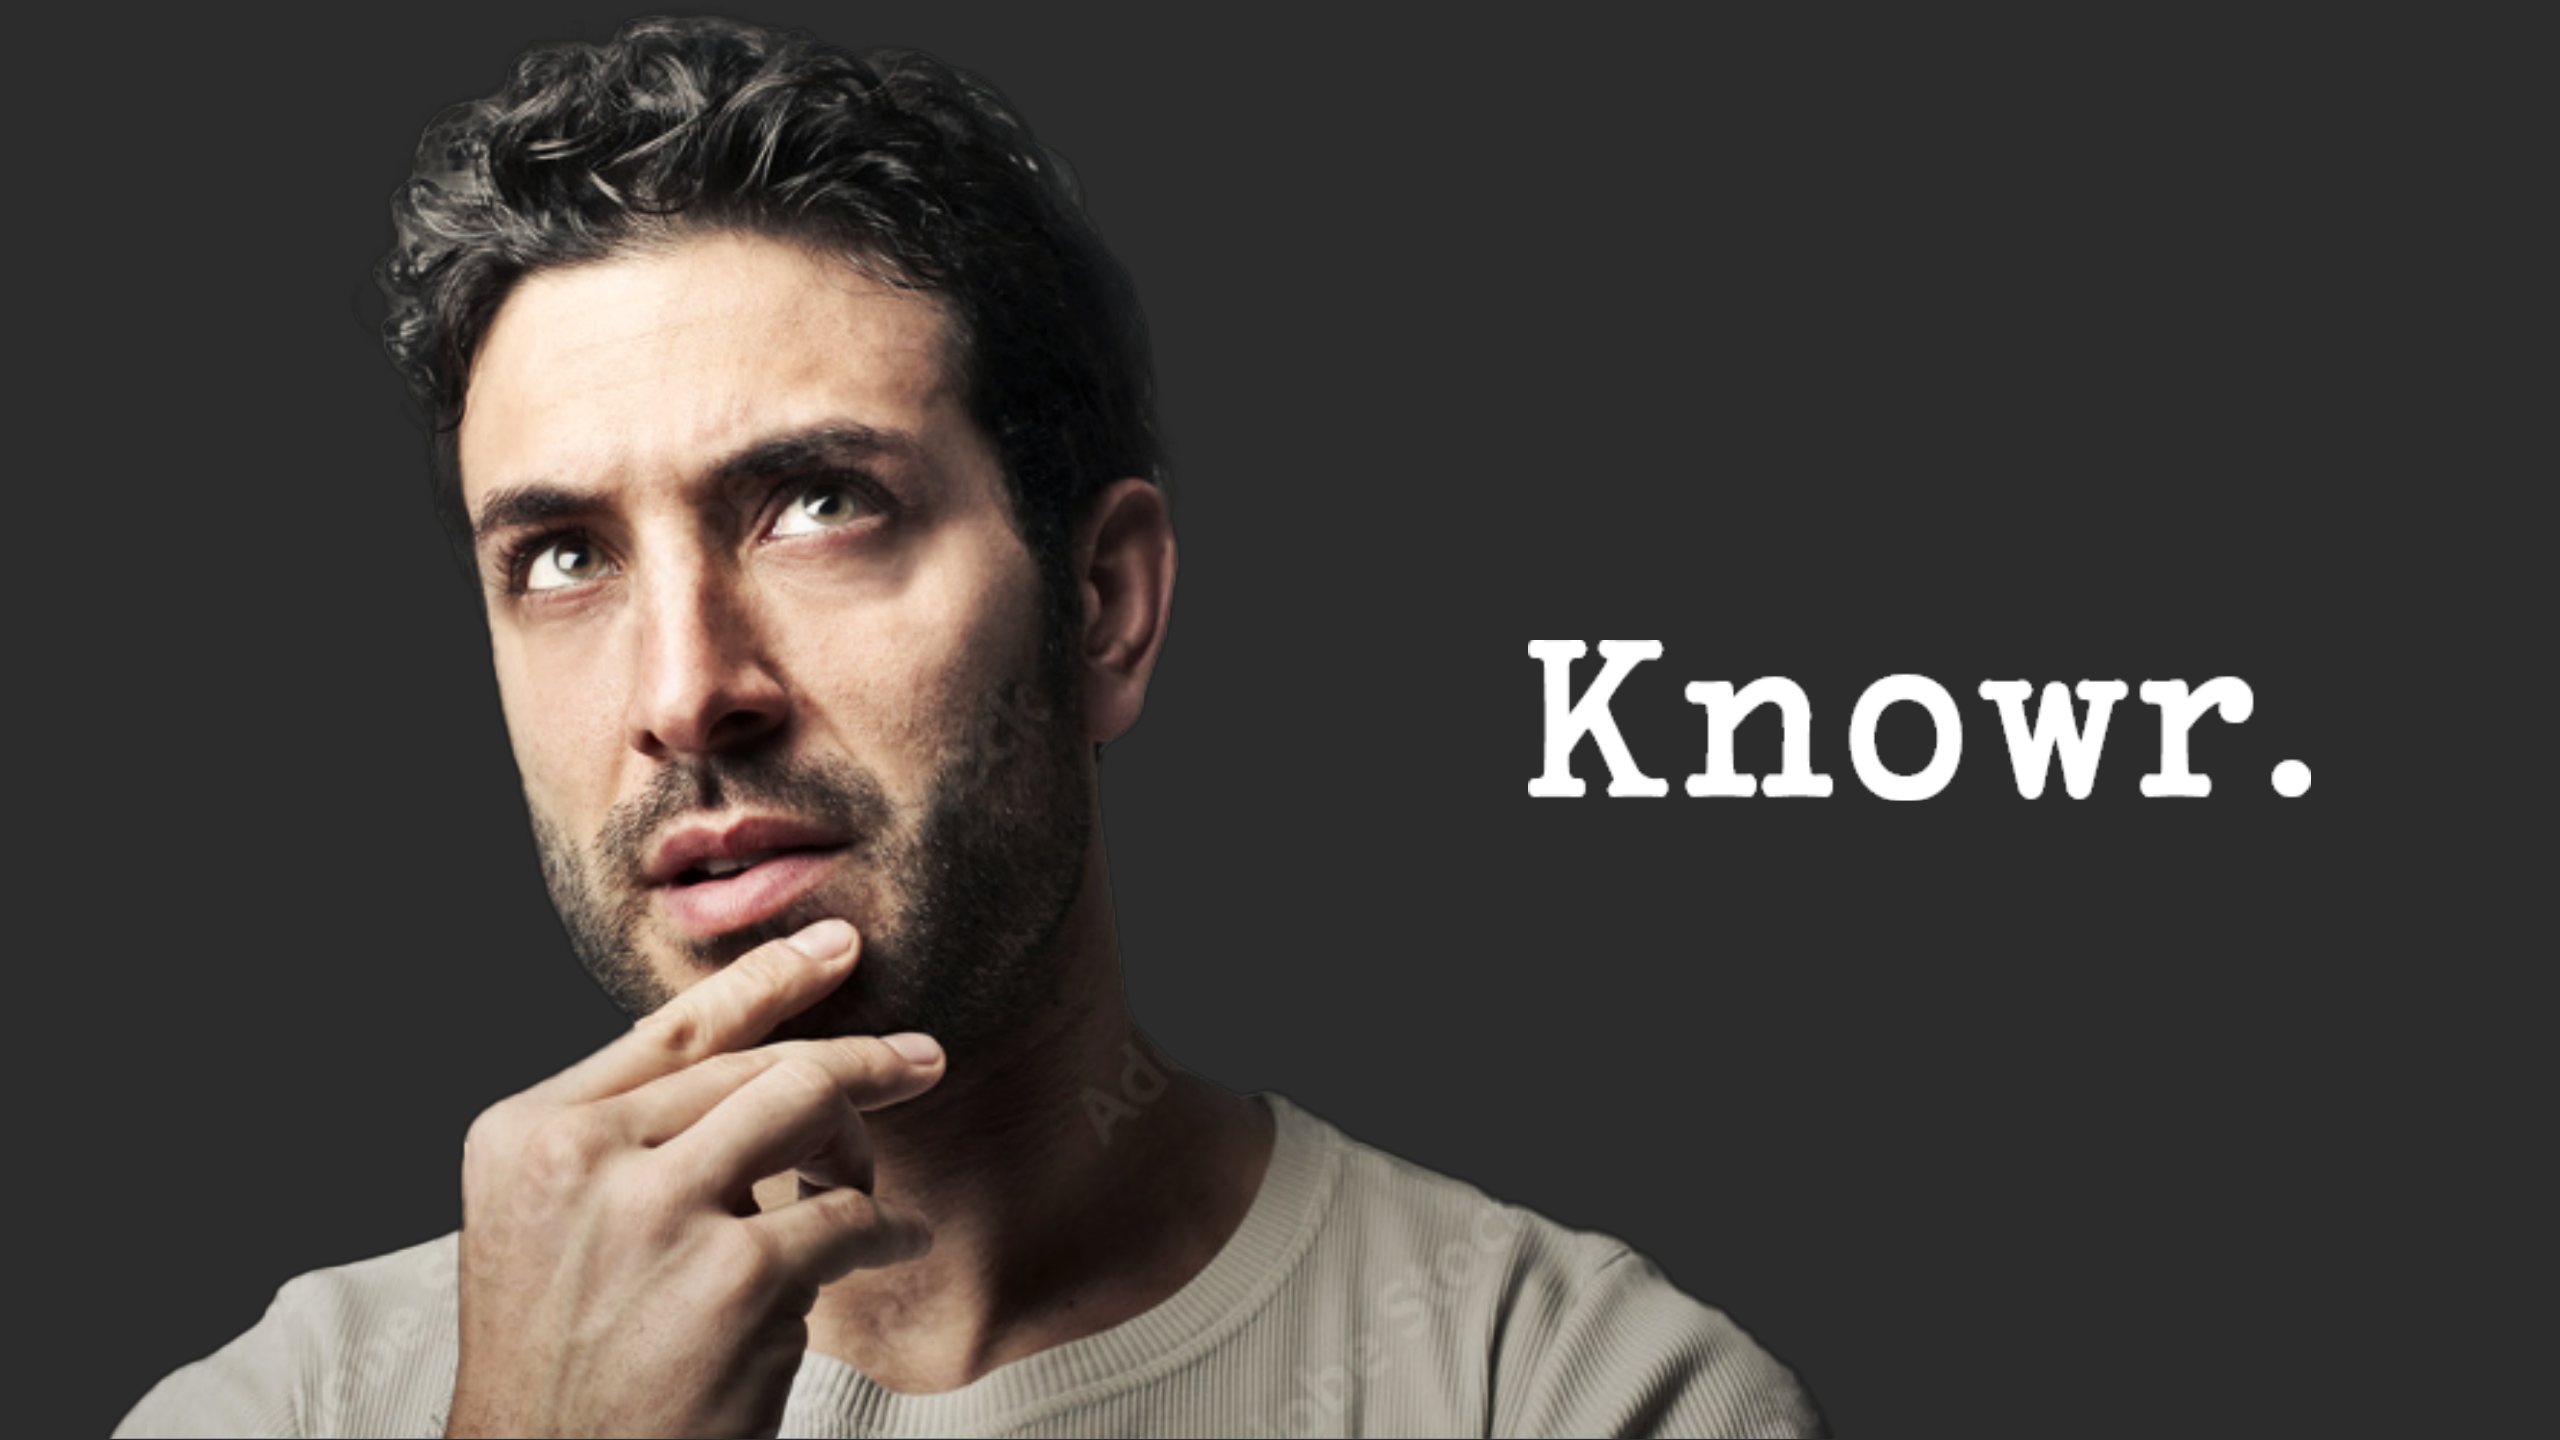 Man thinking, advertising software named Knowr.